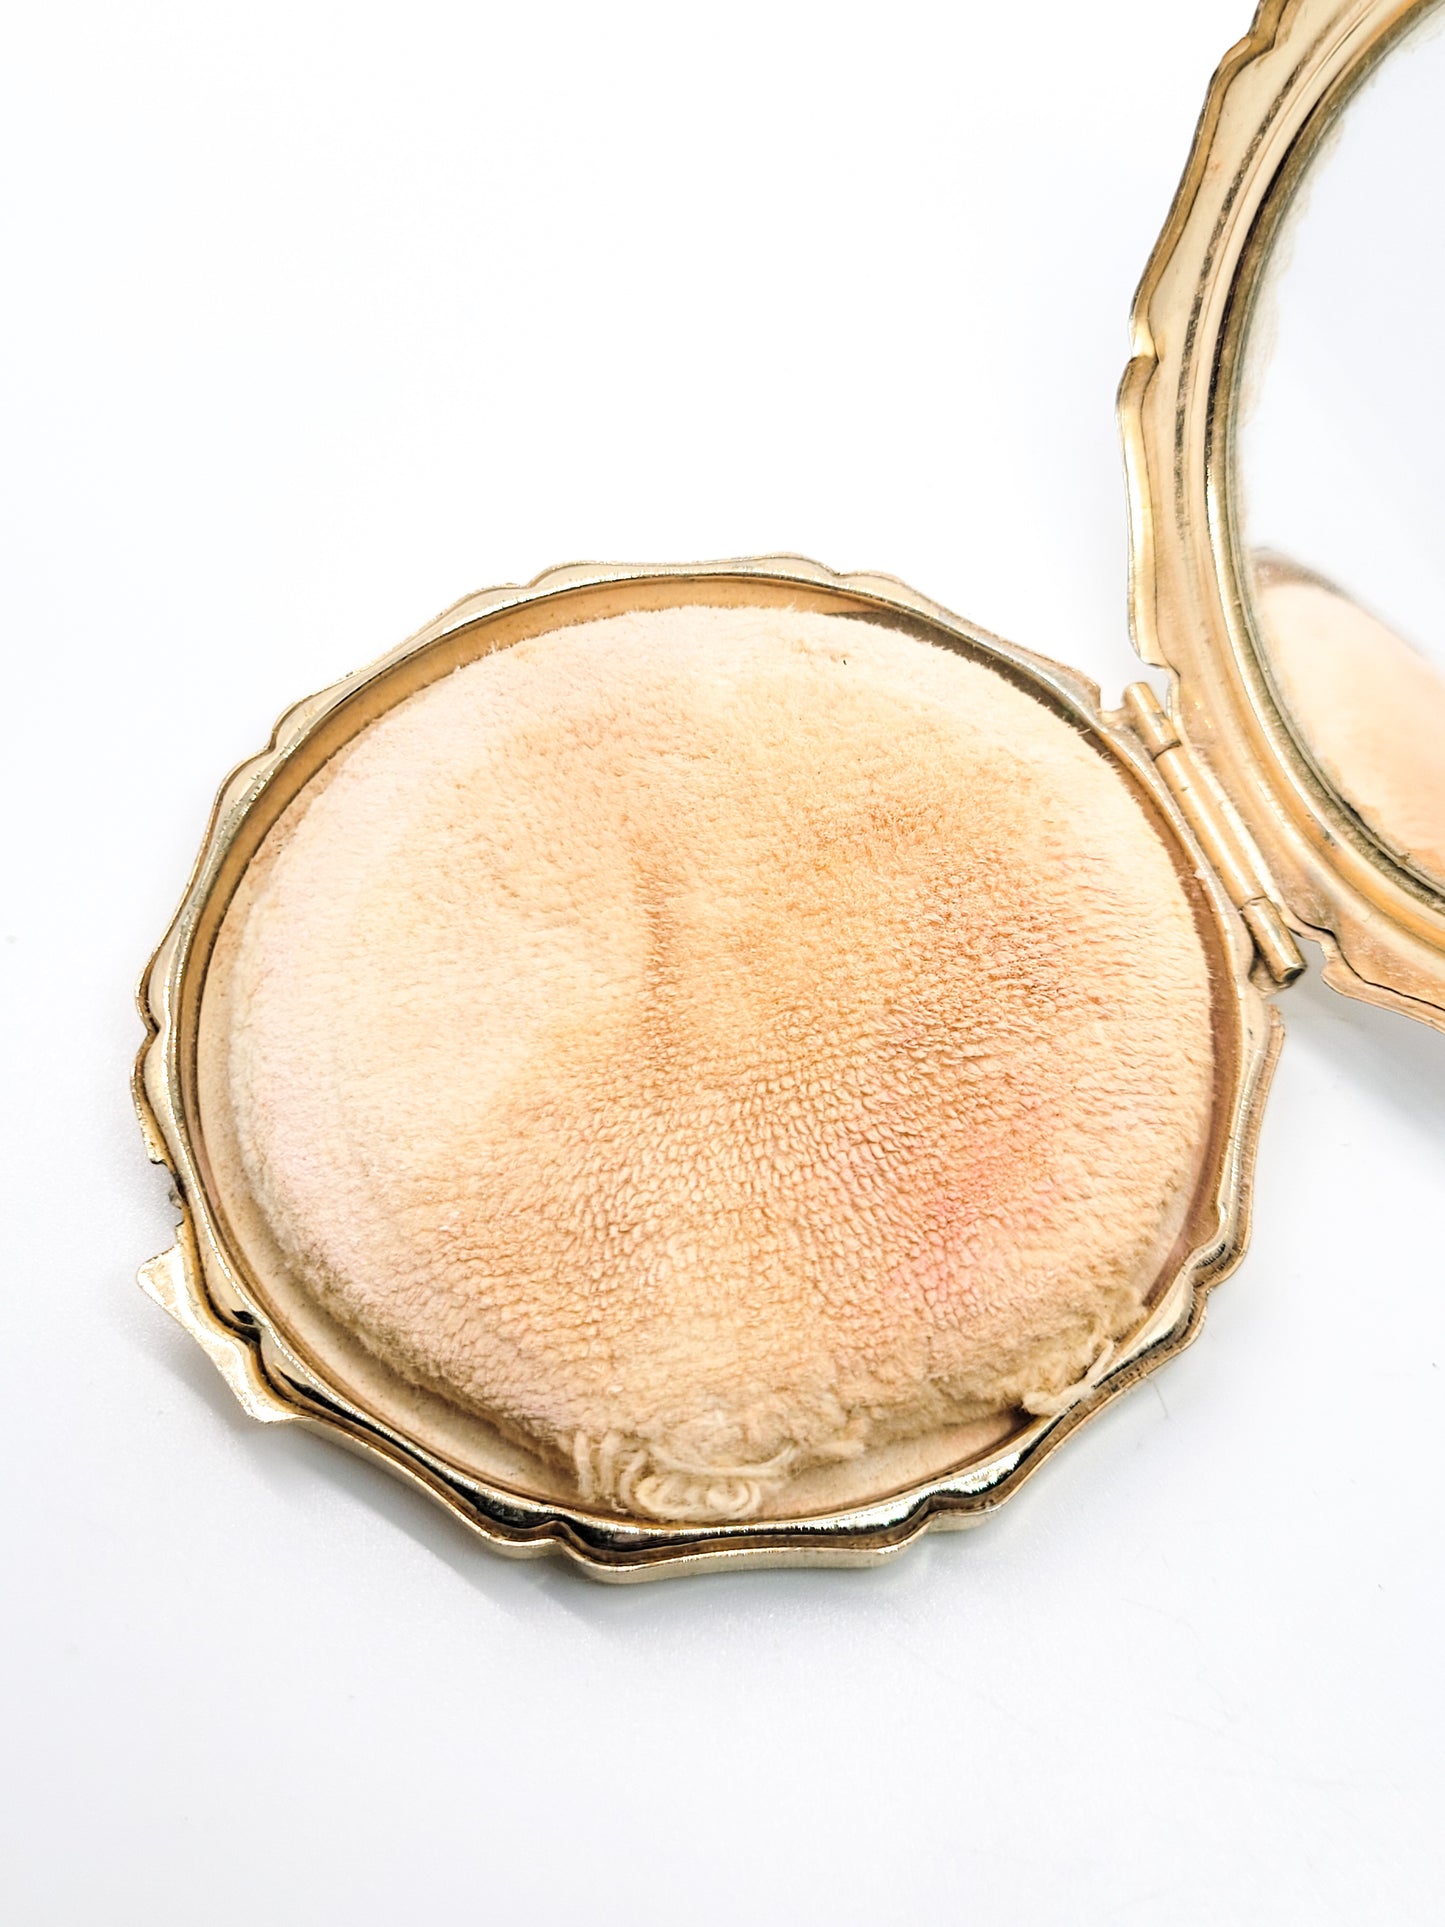 Dancing roses gold toned champagne Made in Japan vintage powder compact mirror